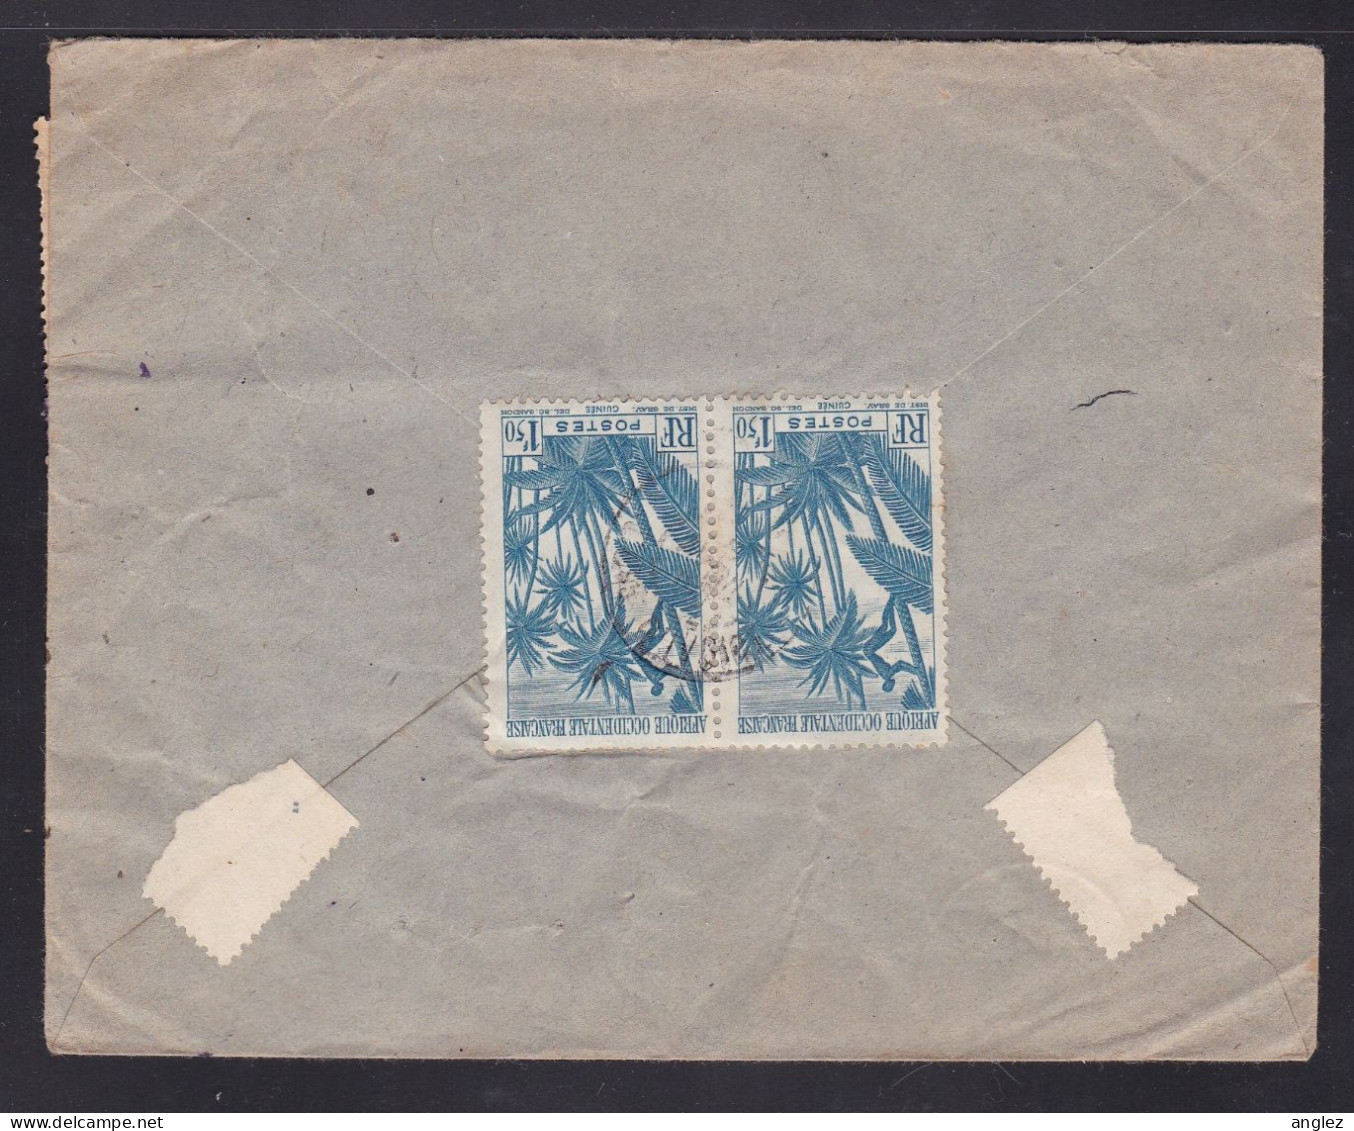 France / AOF / Cote D'Ivoire / Ivory Coast - 1950 Airmail Cover Divo To Chicago USA - Lettres & Documents